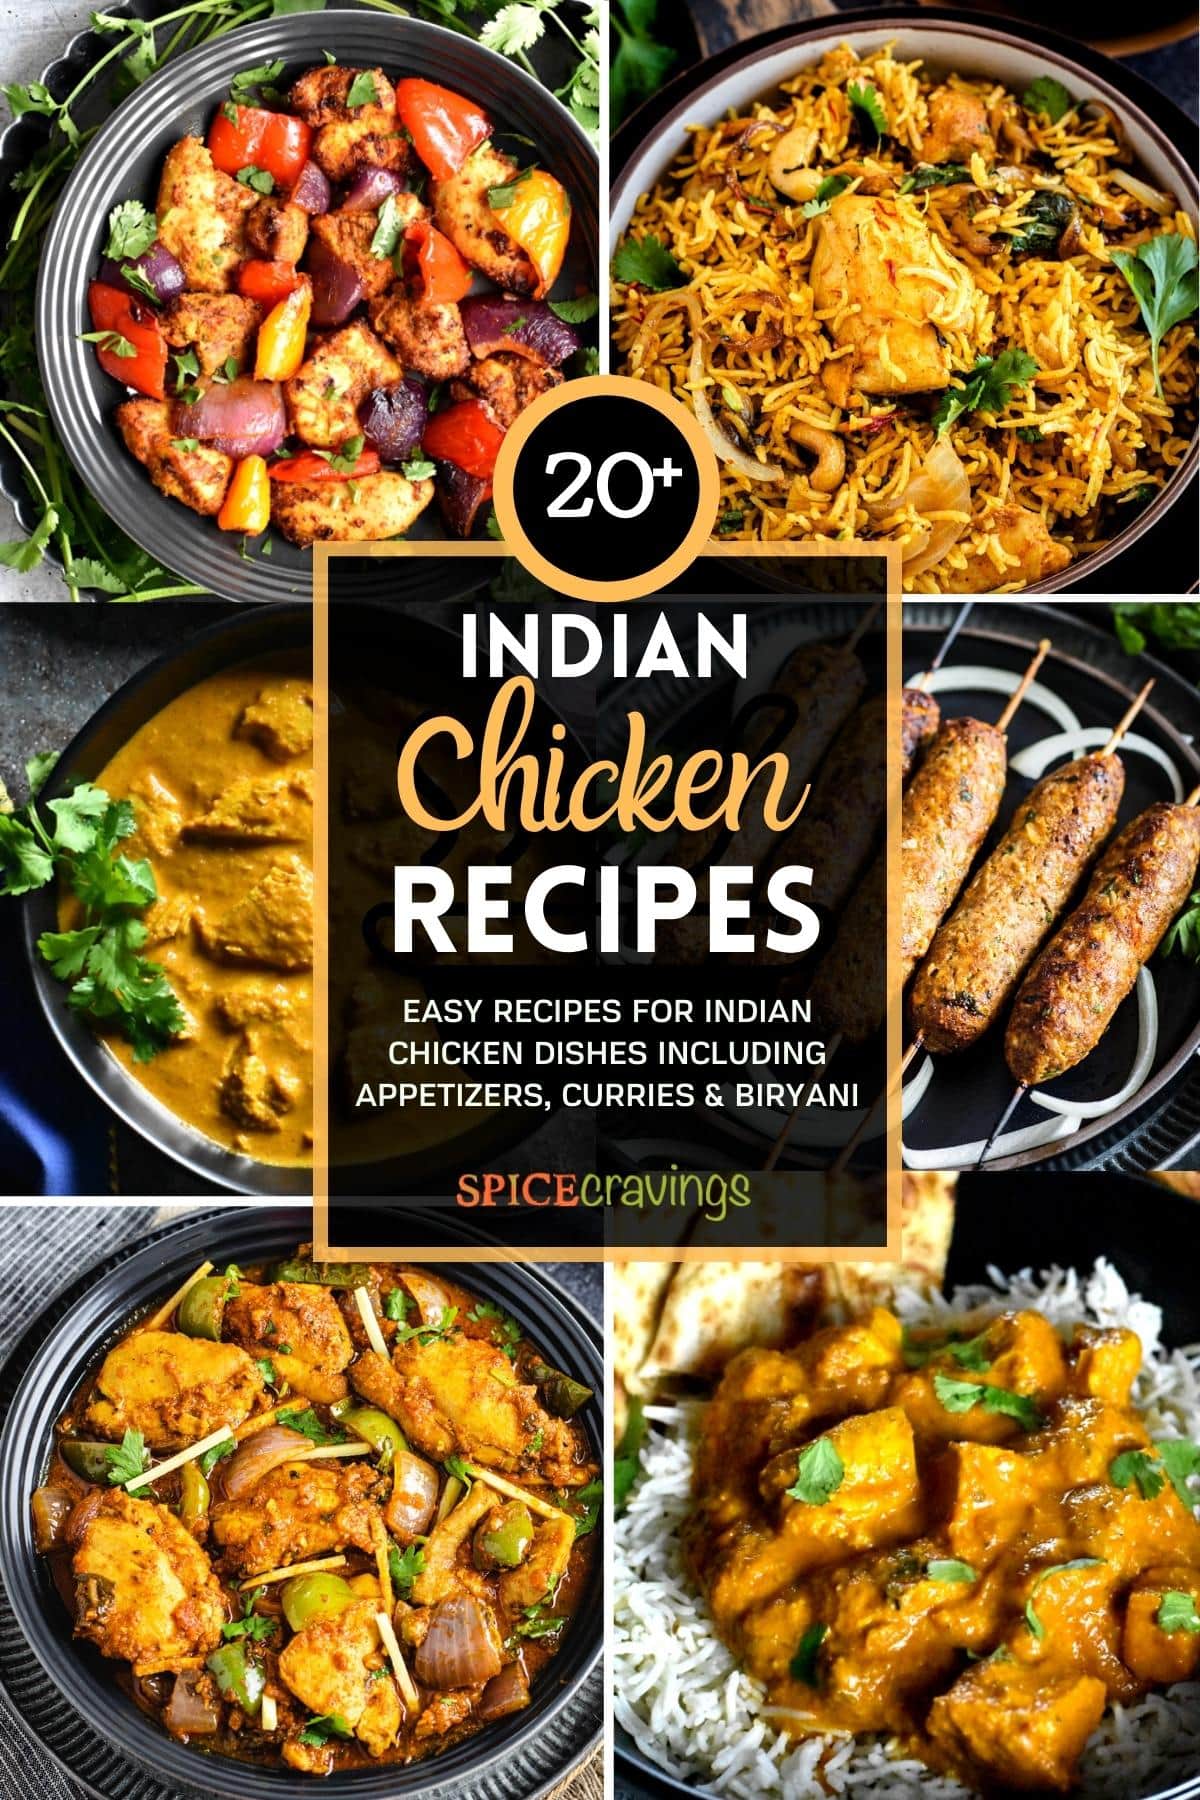 6-image grid of chicken recipes with title: Indian Chicken Recipes